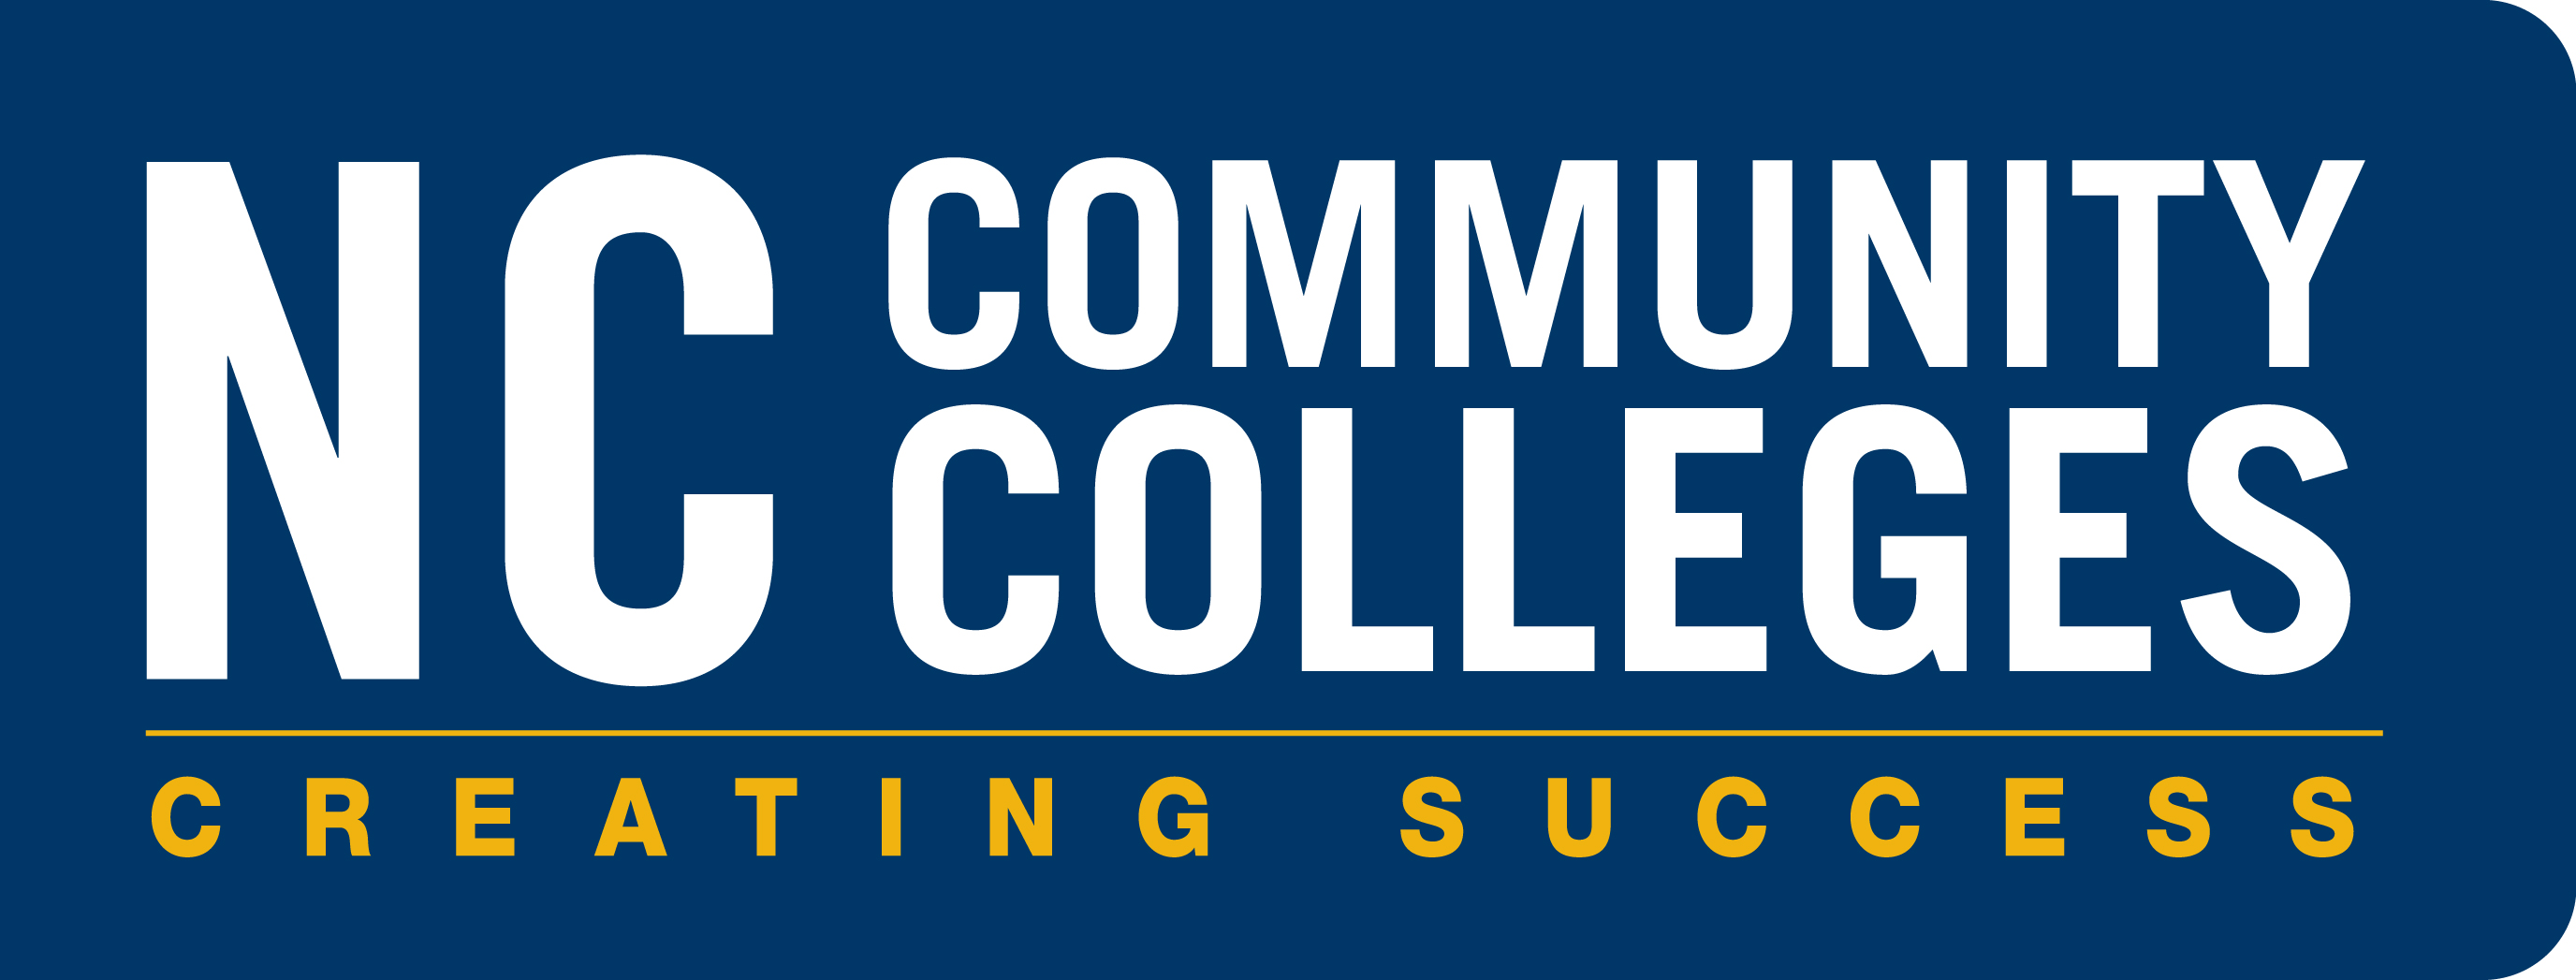 Community Colleges, Independent Colleges and Universities Sign Revised Agreement Improving the Transfer Process